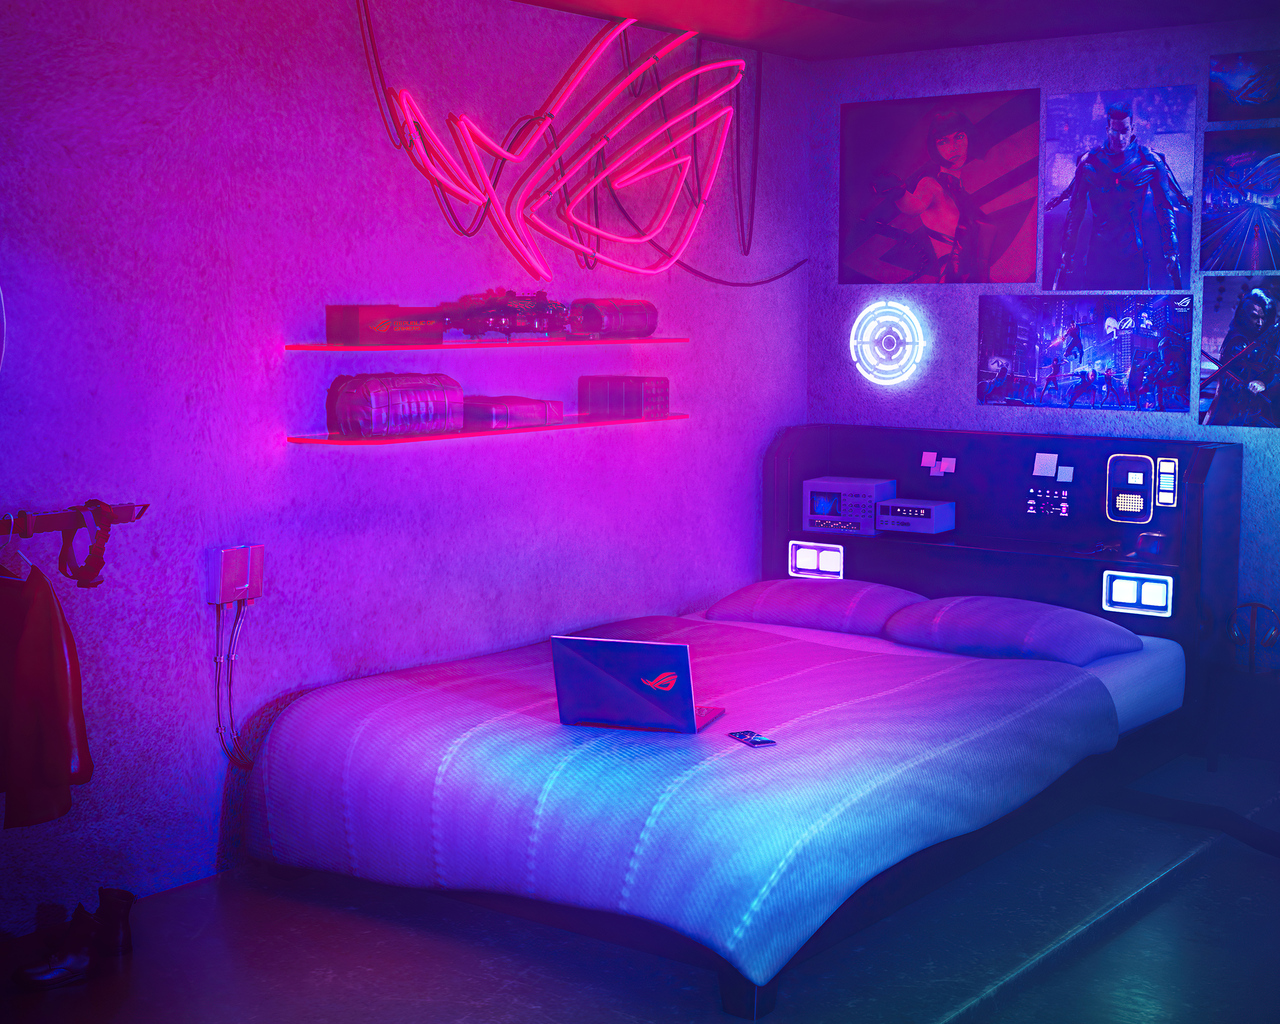 A bedroom with a bed, a laptop, and a neon sign above the bed. - Gaming